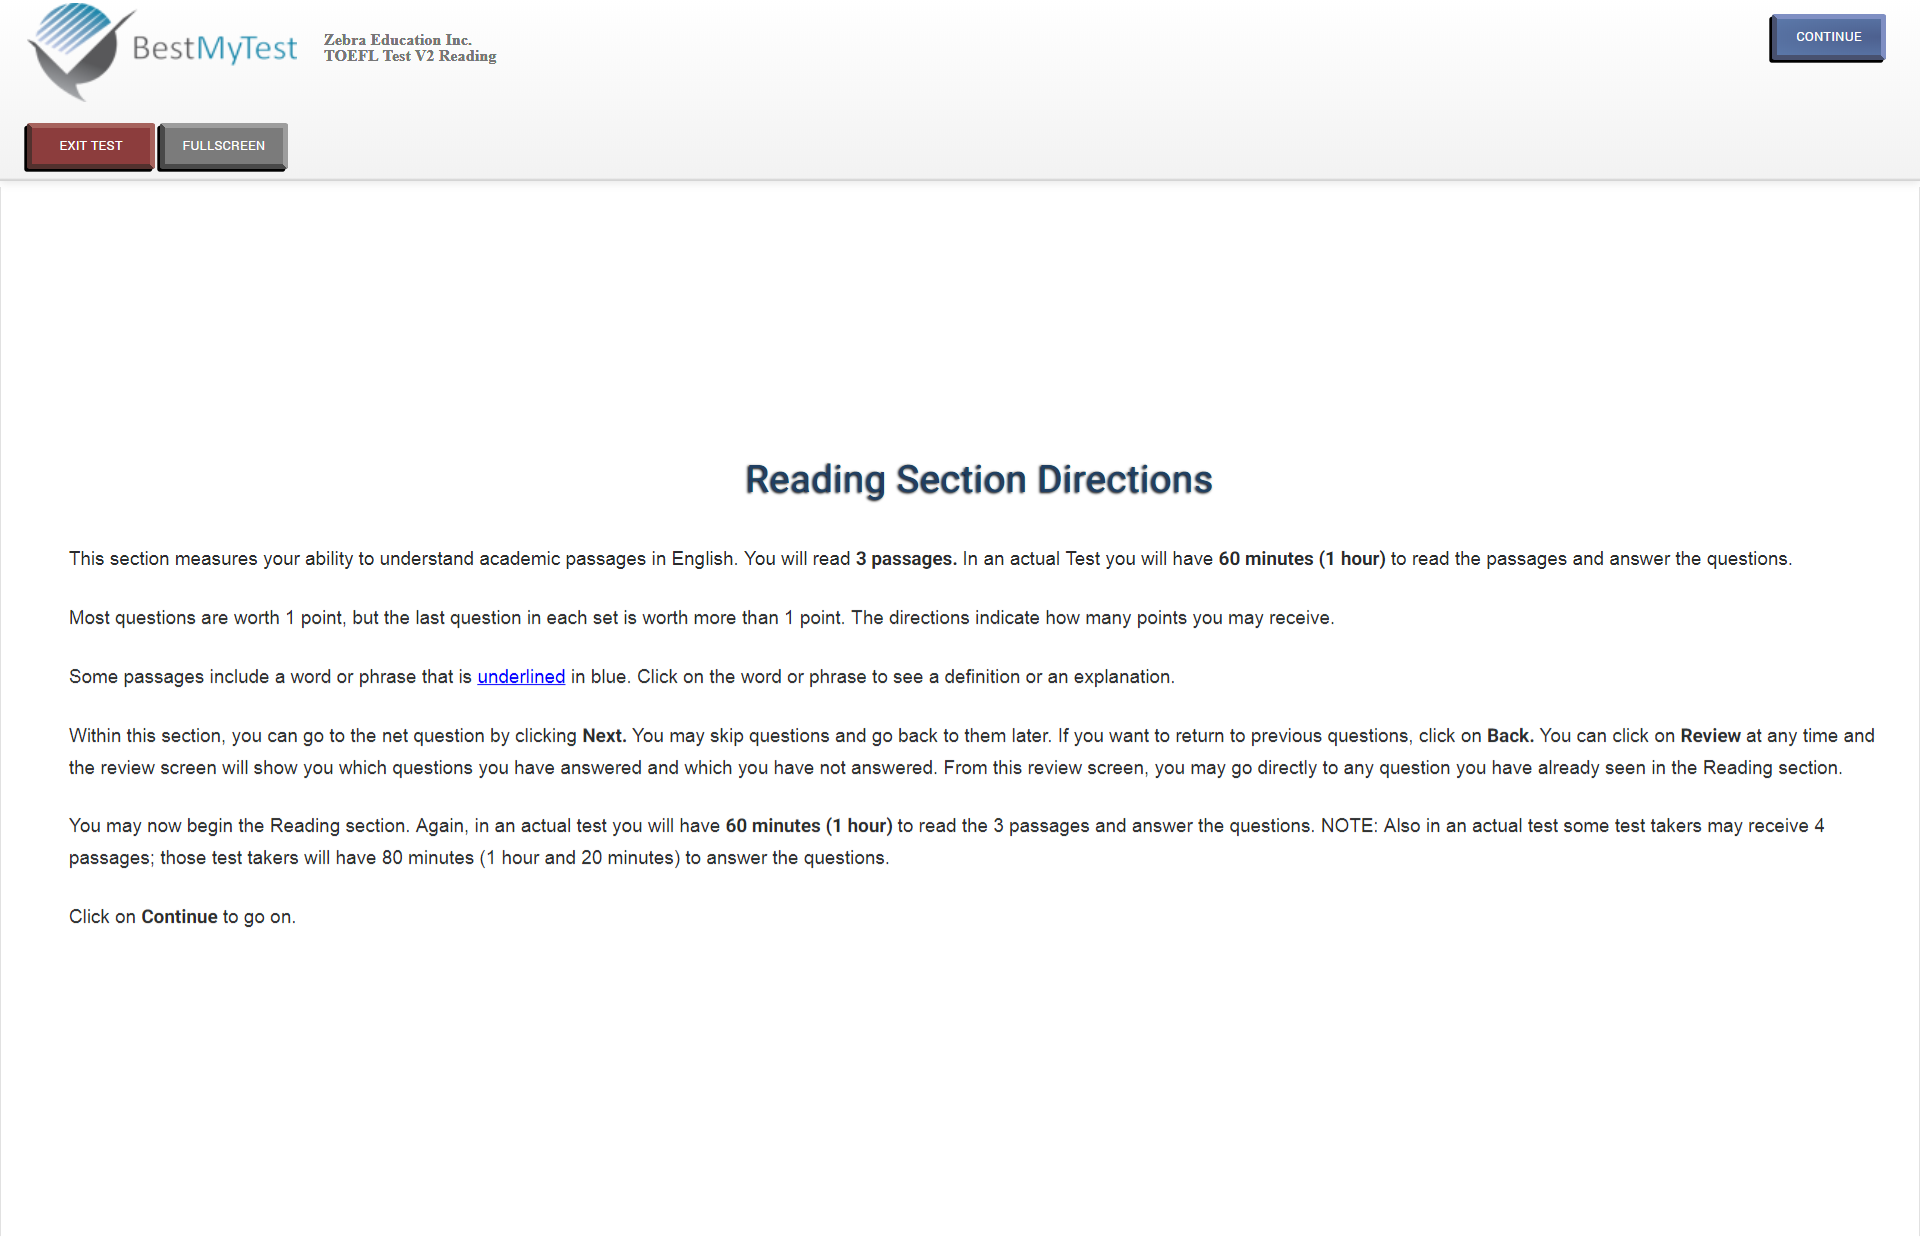 TOEFL reading section direction